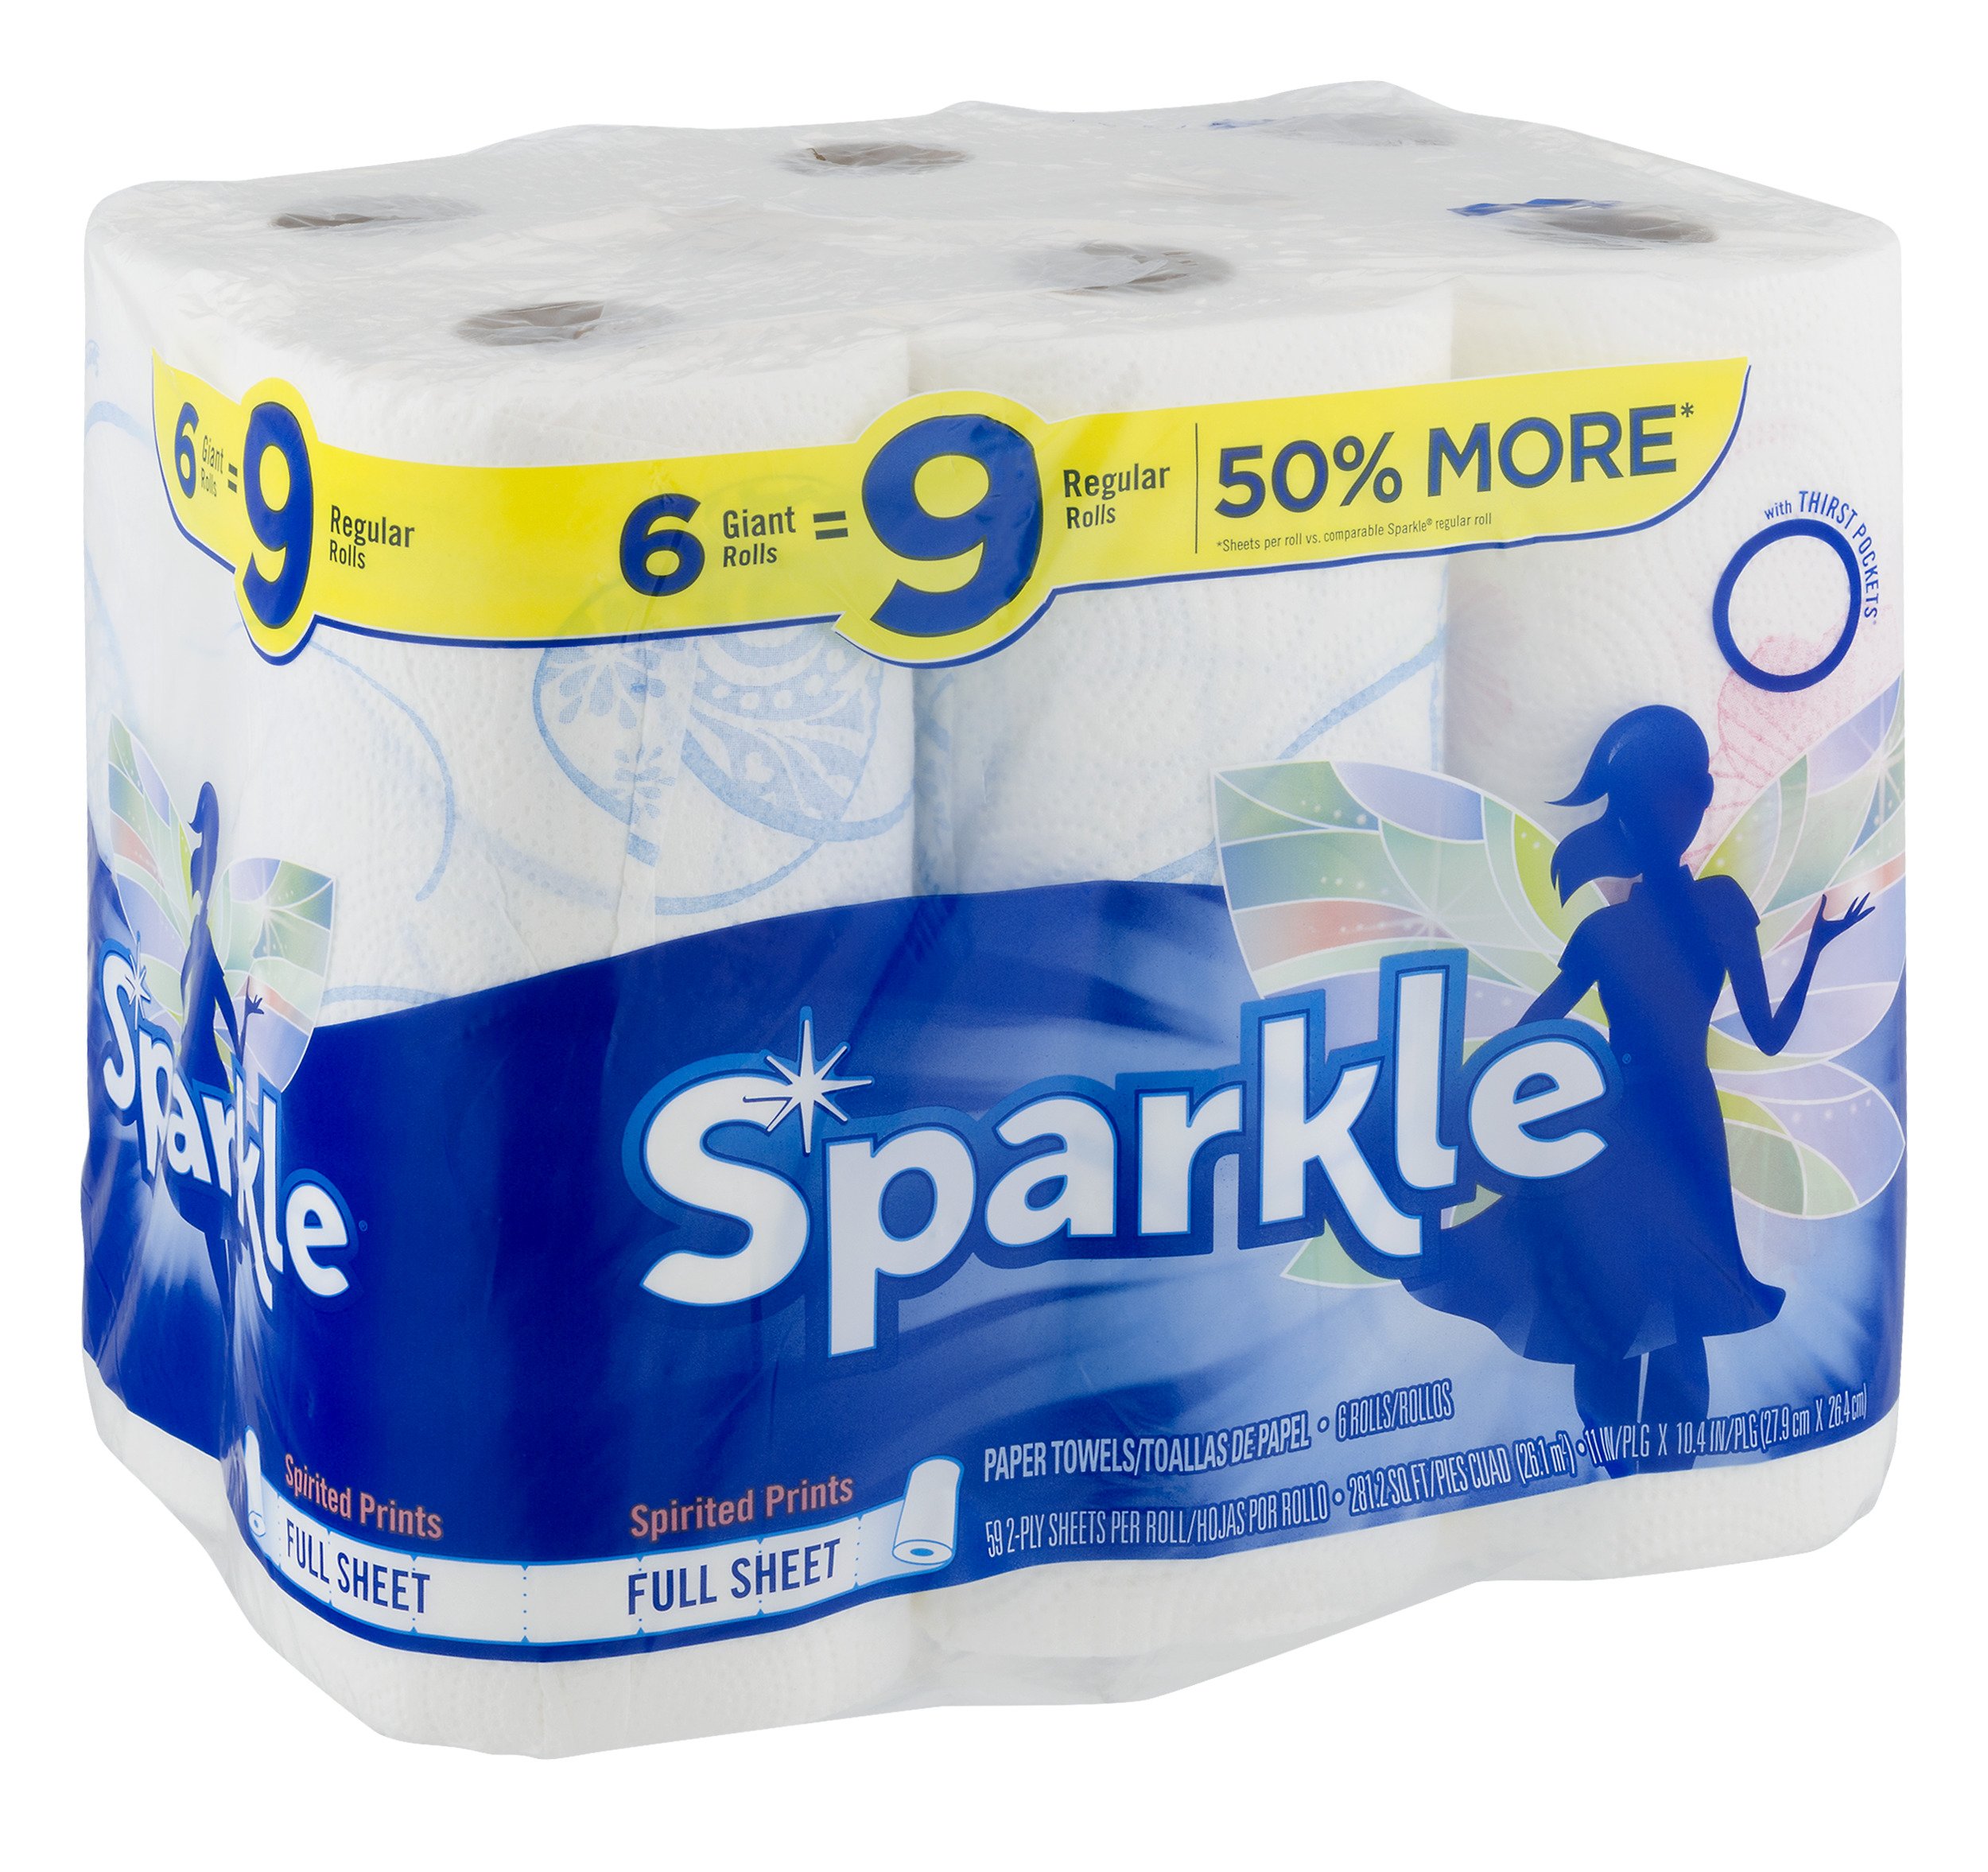 6 Family Rolls Sparkle ® Paper Towels Full Sheet Print.